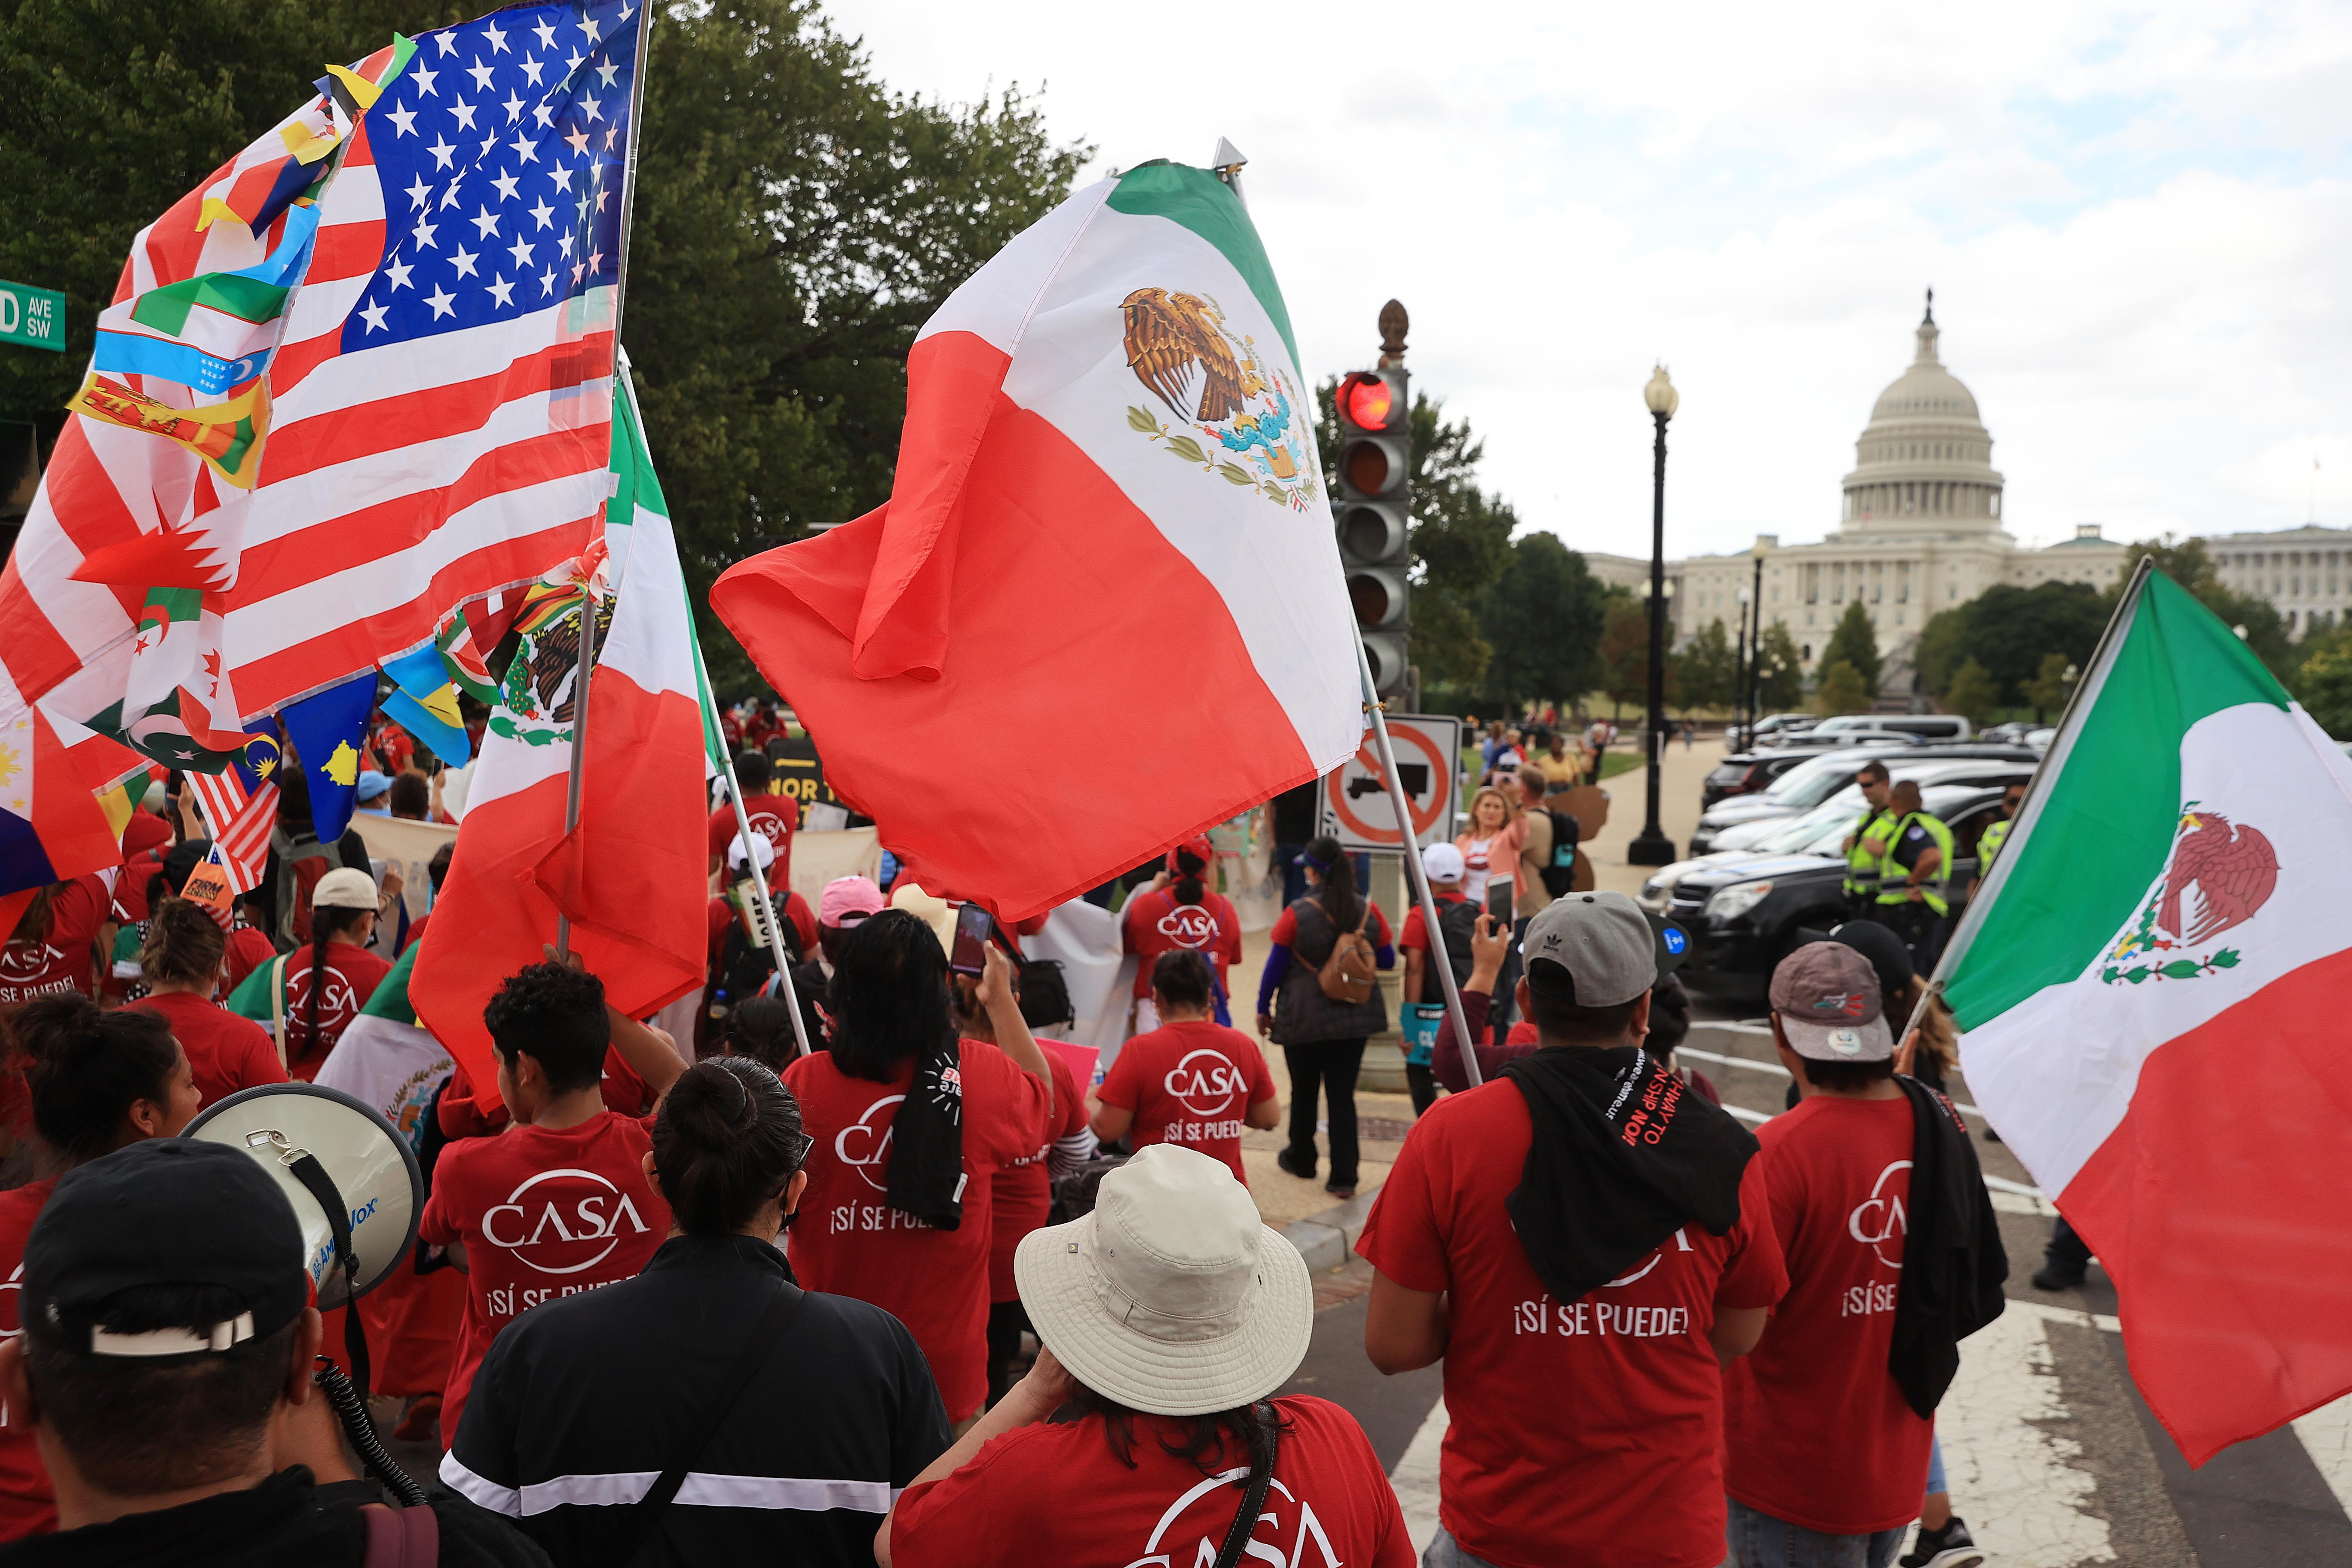 CASA immigrants and allies during Washington D.C. demonstration